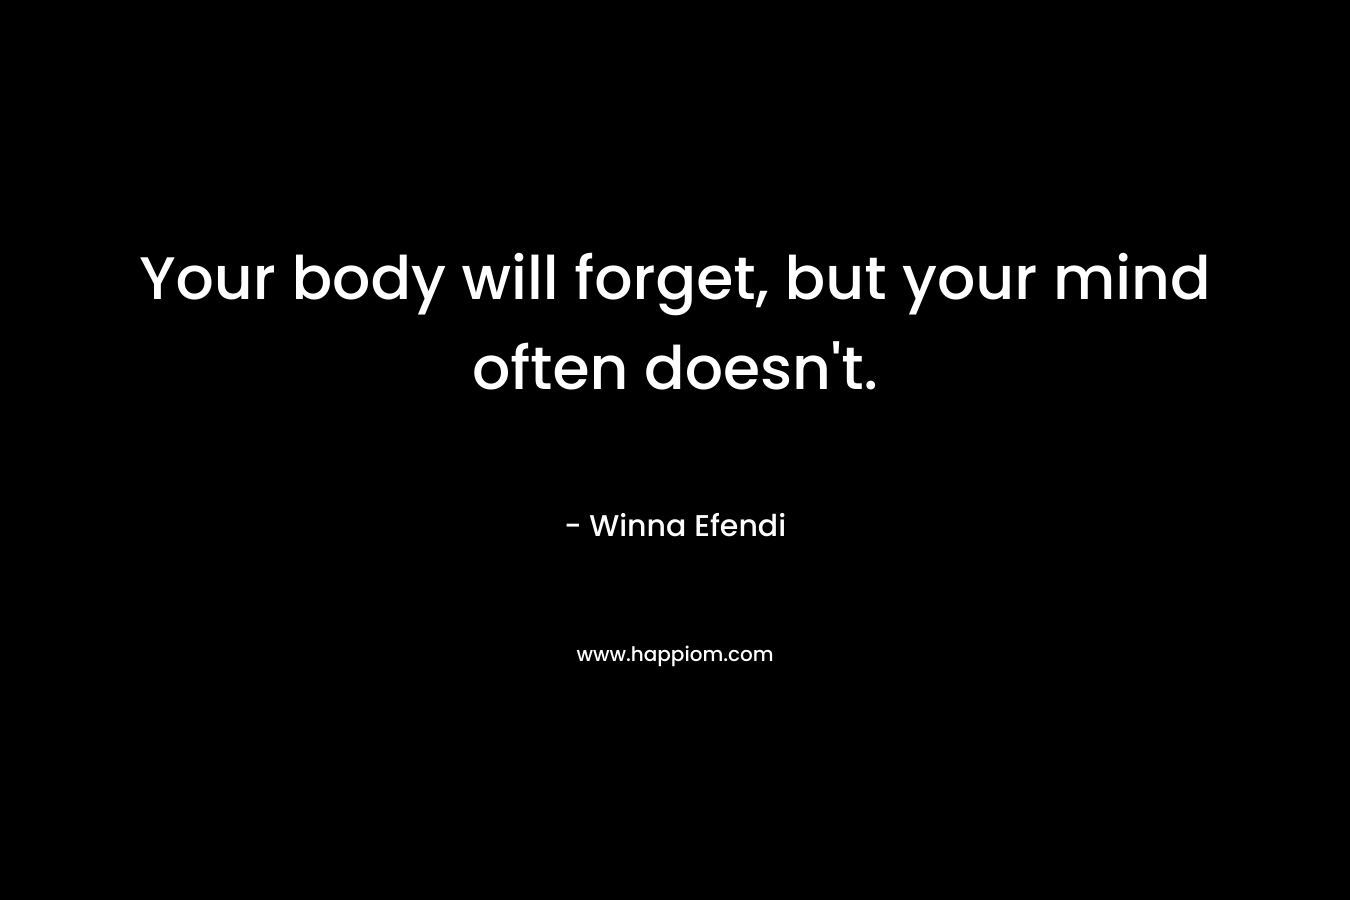 Your body will forget, but your mind often doesn’t. – Winna Efendi